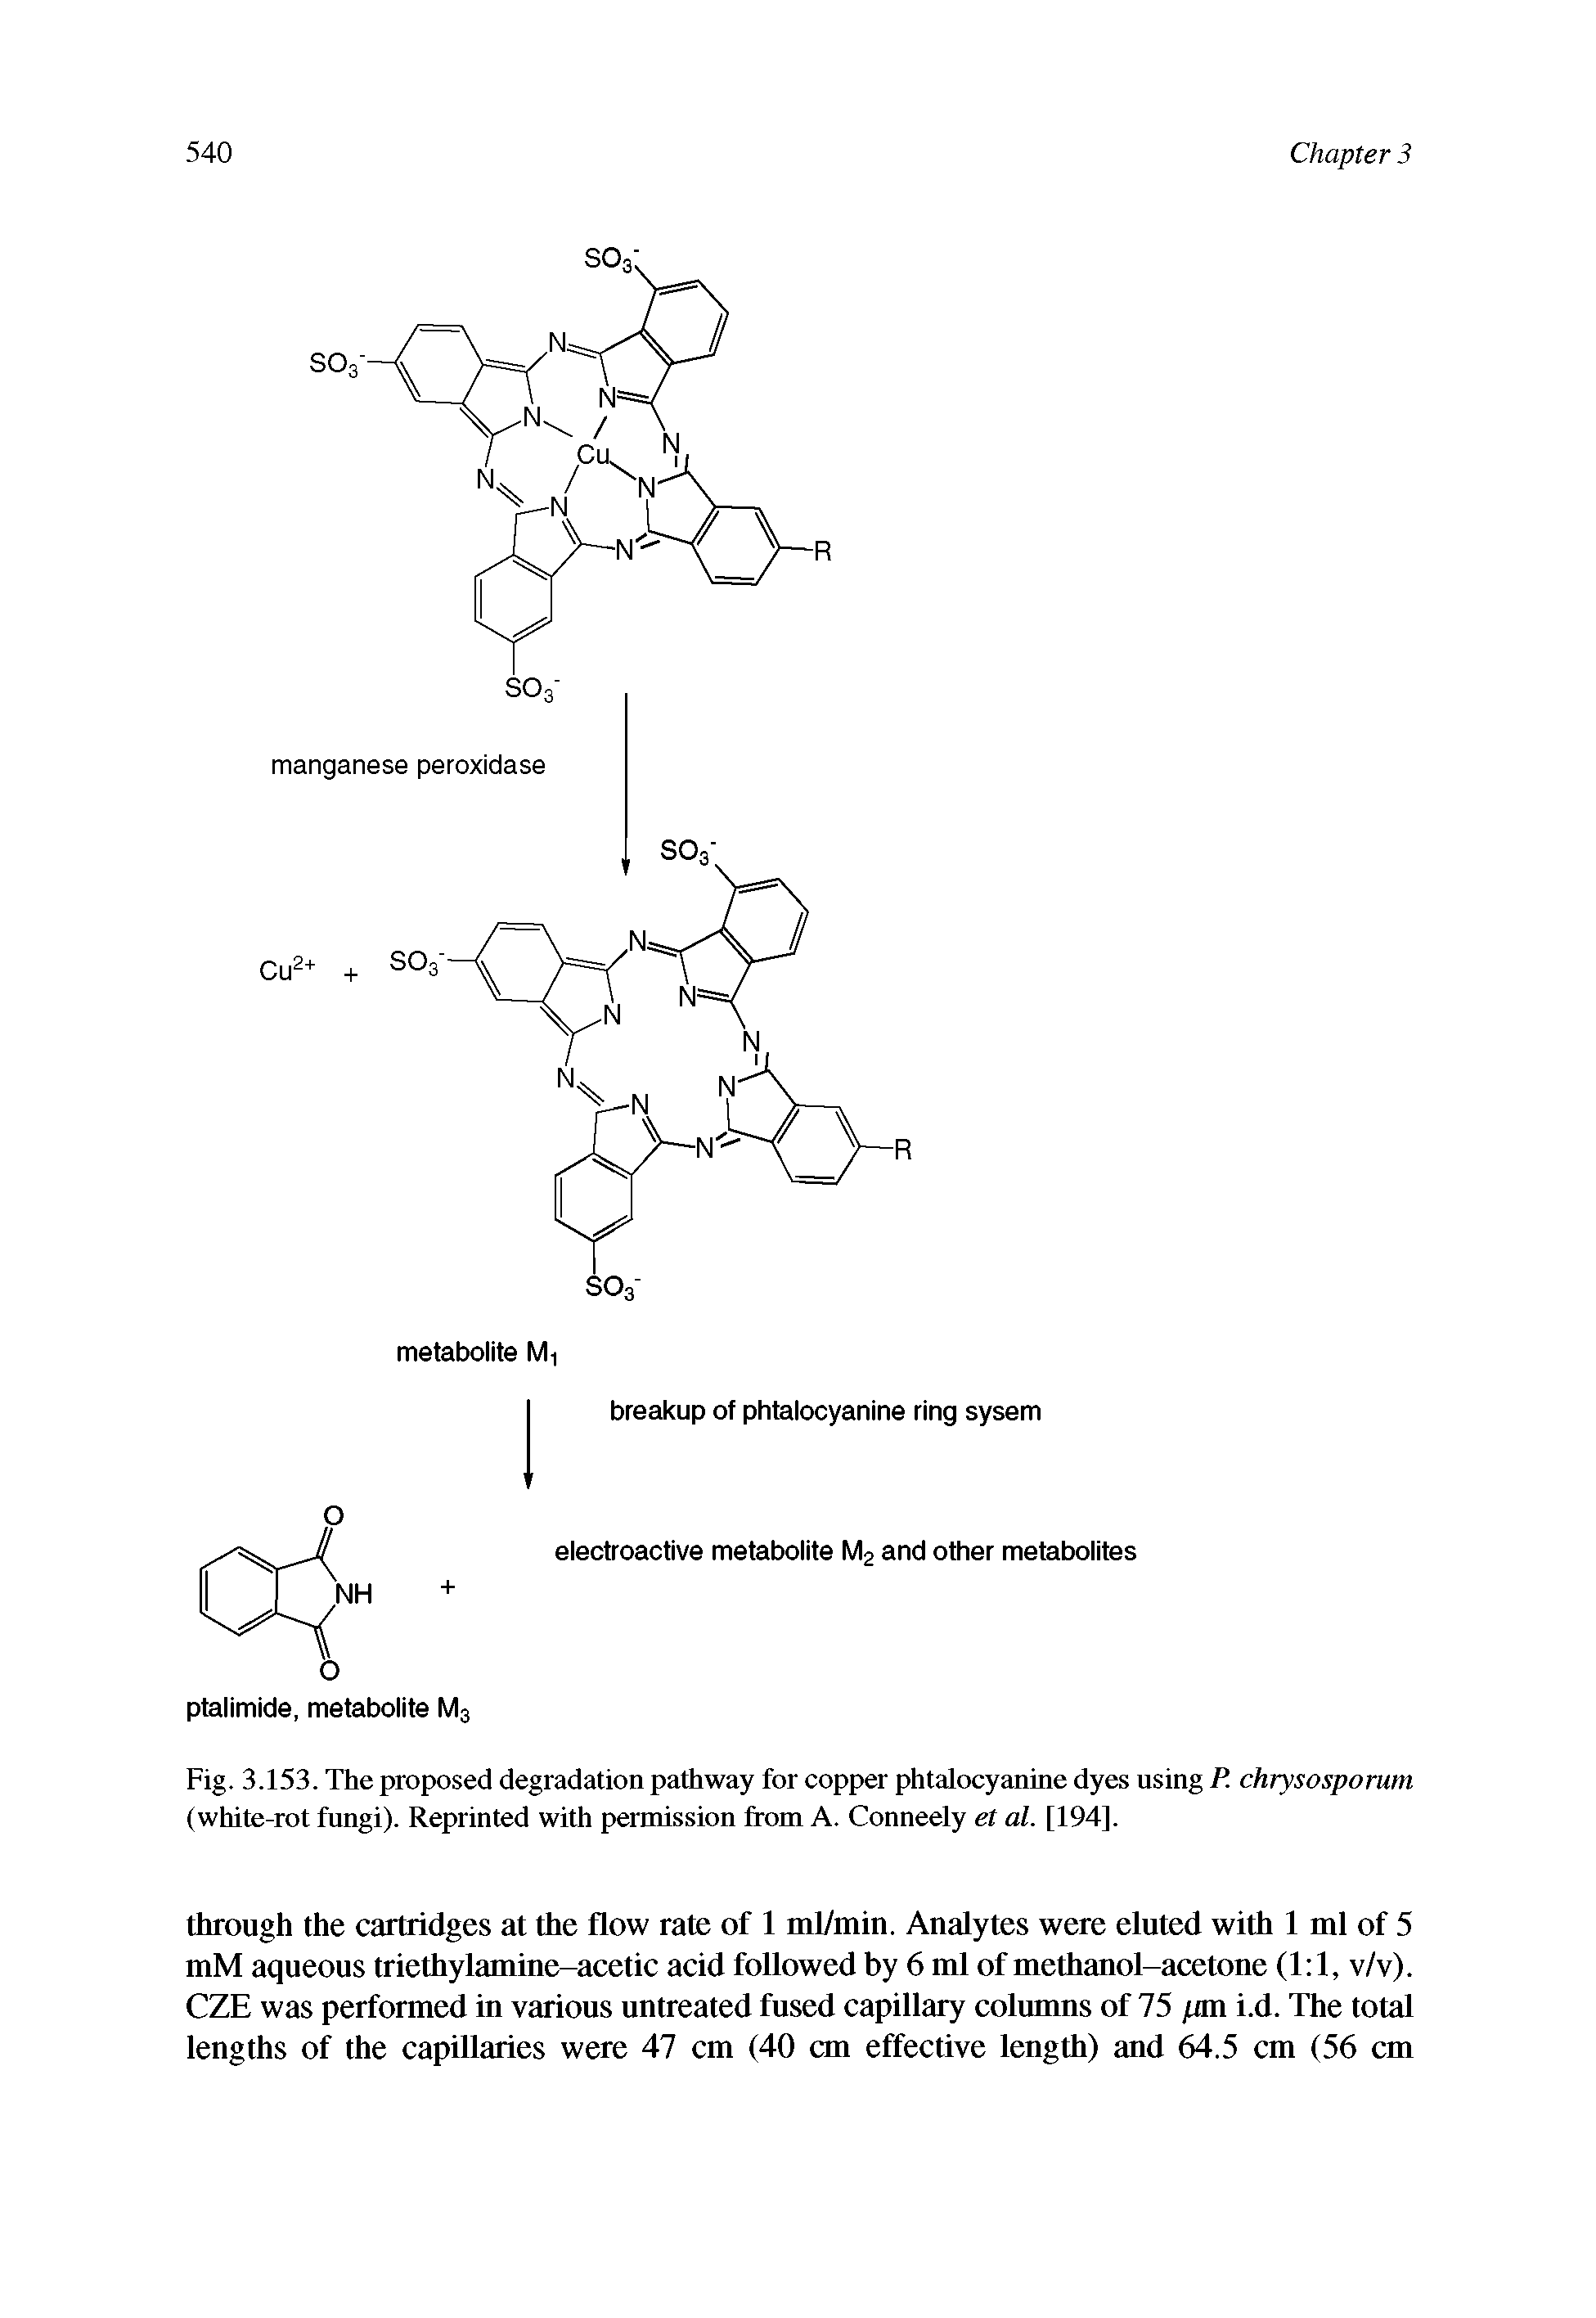 Fig. 3.153. The proposed degradation pathway for copper phtalocyanine dyes using P. chrysosporum (white-rot fungi). Reprinted with permission from A. Conneely el al. [194].